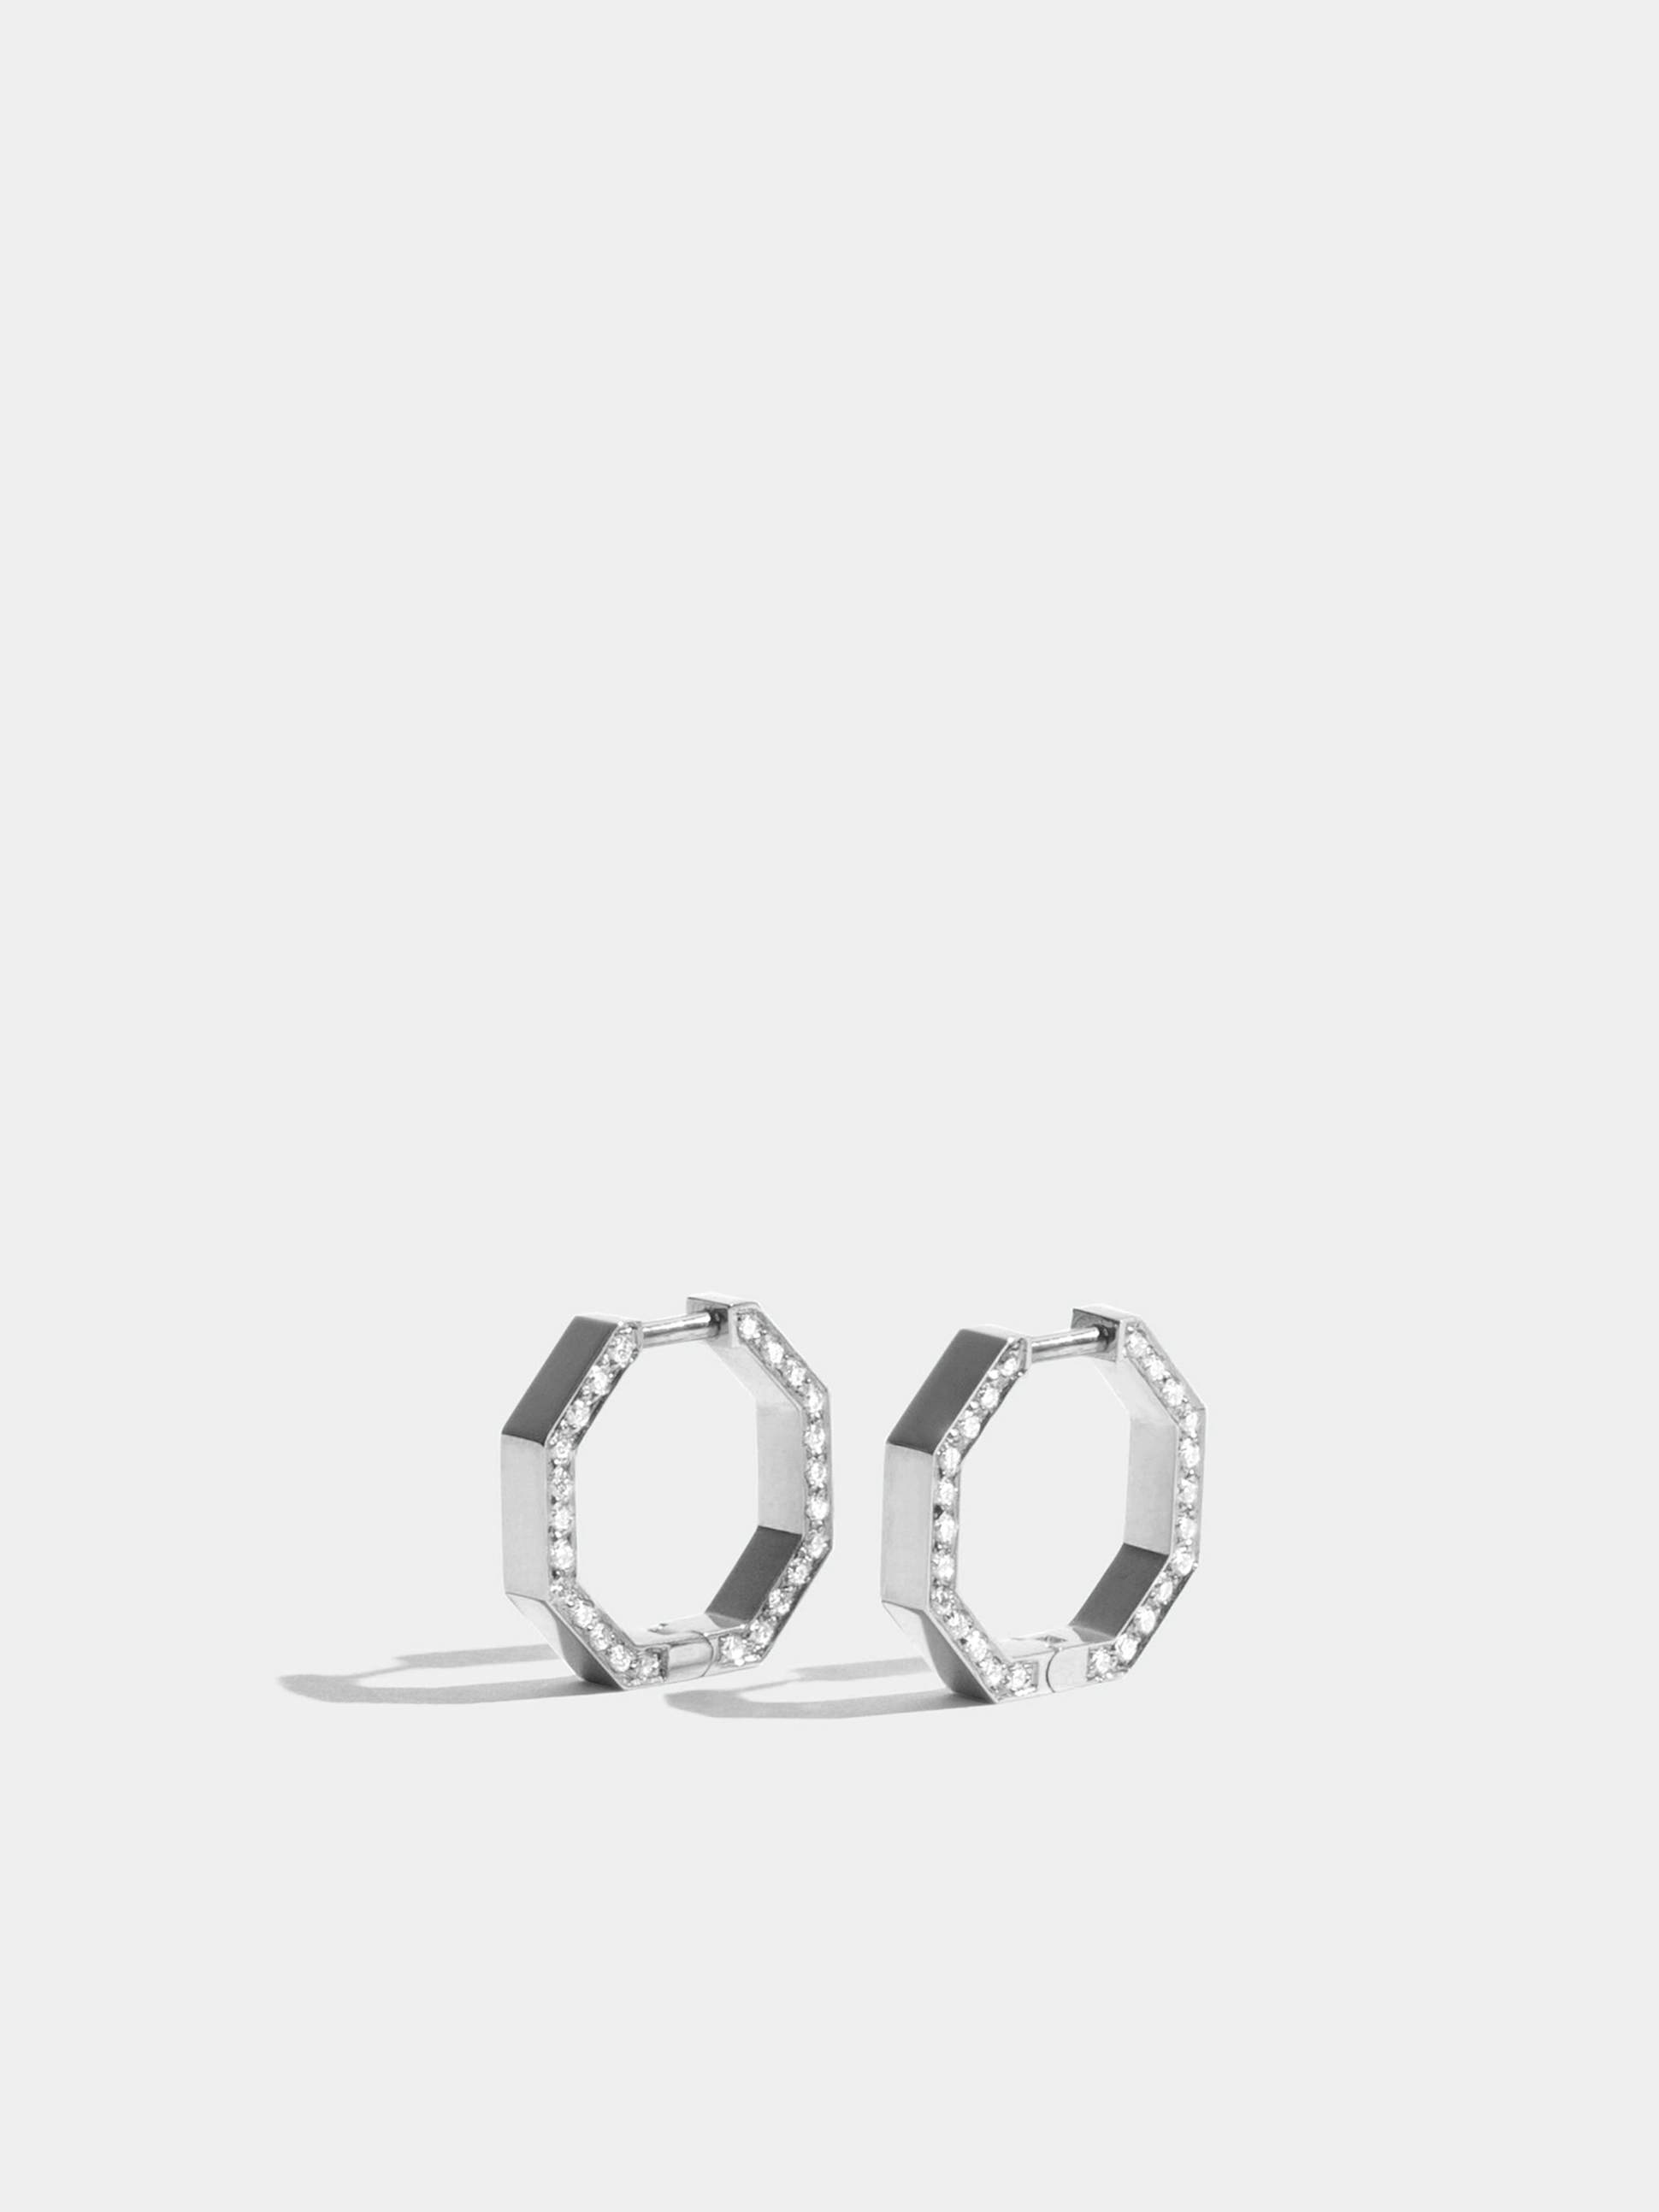 Octogone 13mm single-loop in 18k Fairmined ethical white gold, paved with lab-grown diamonds on the edge, the unity. 